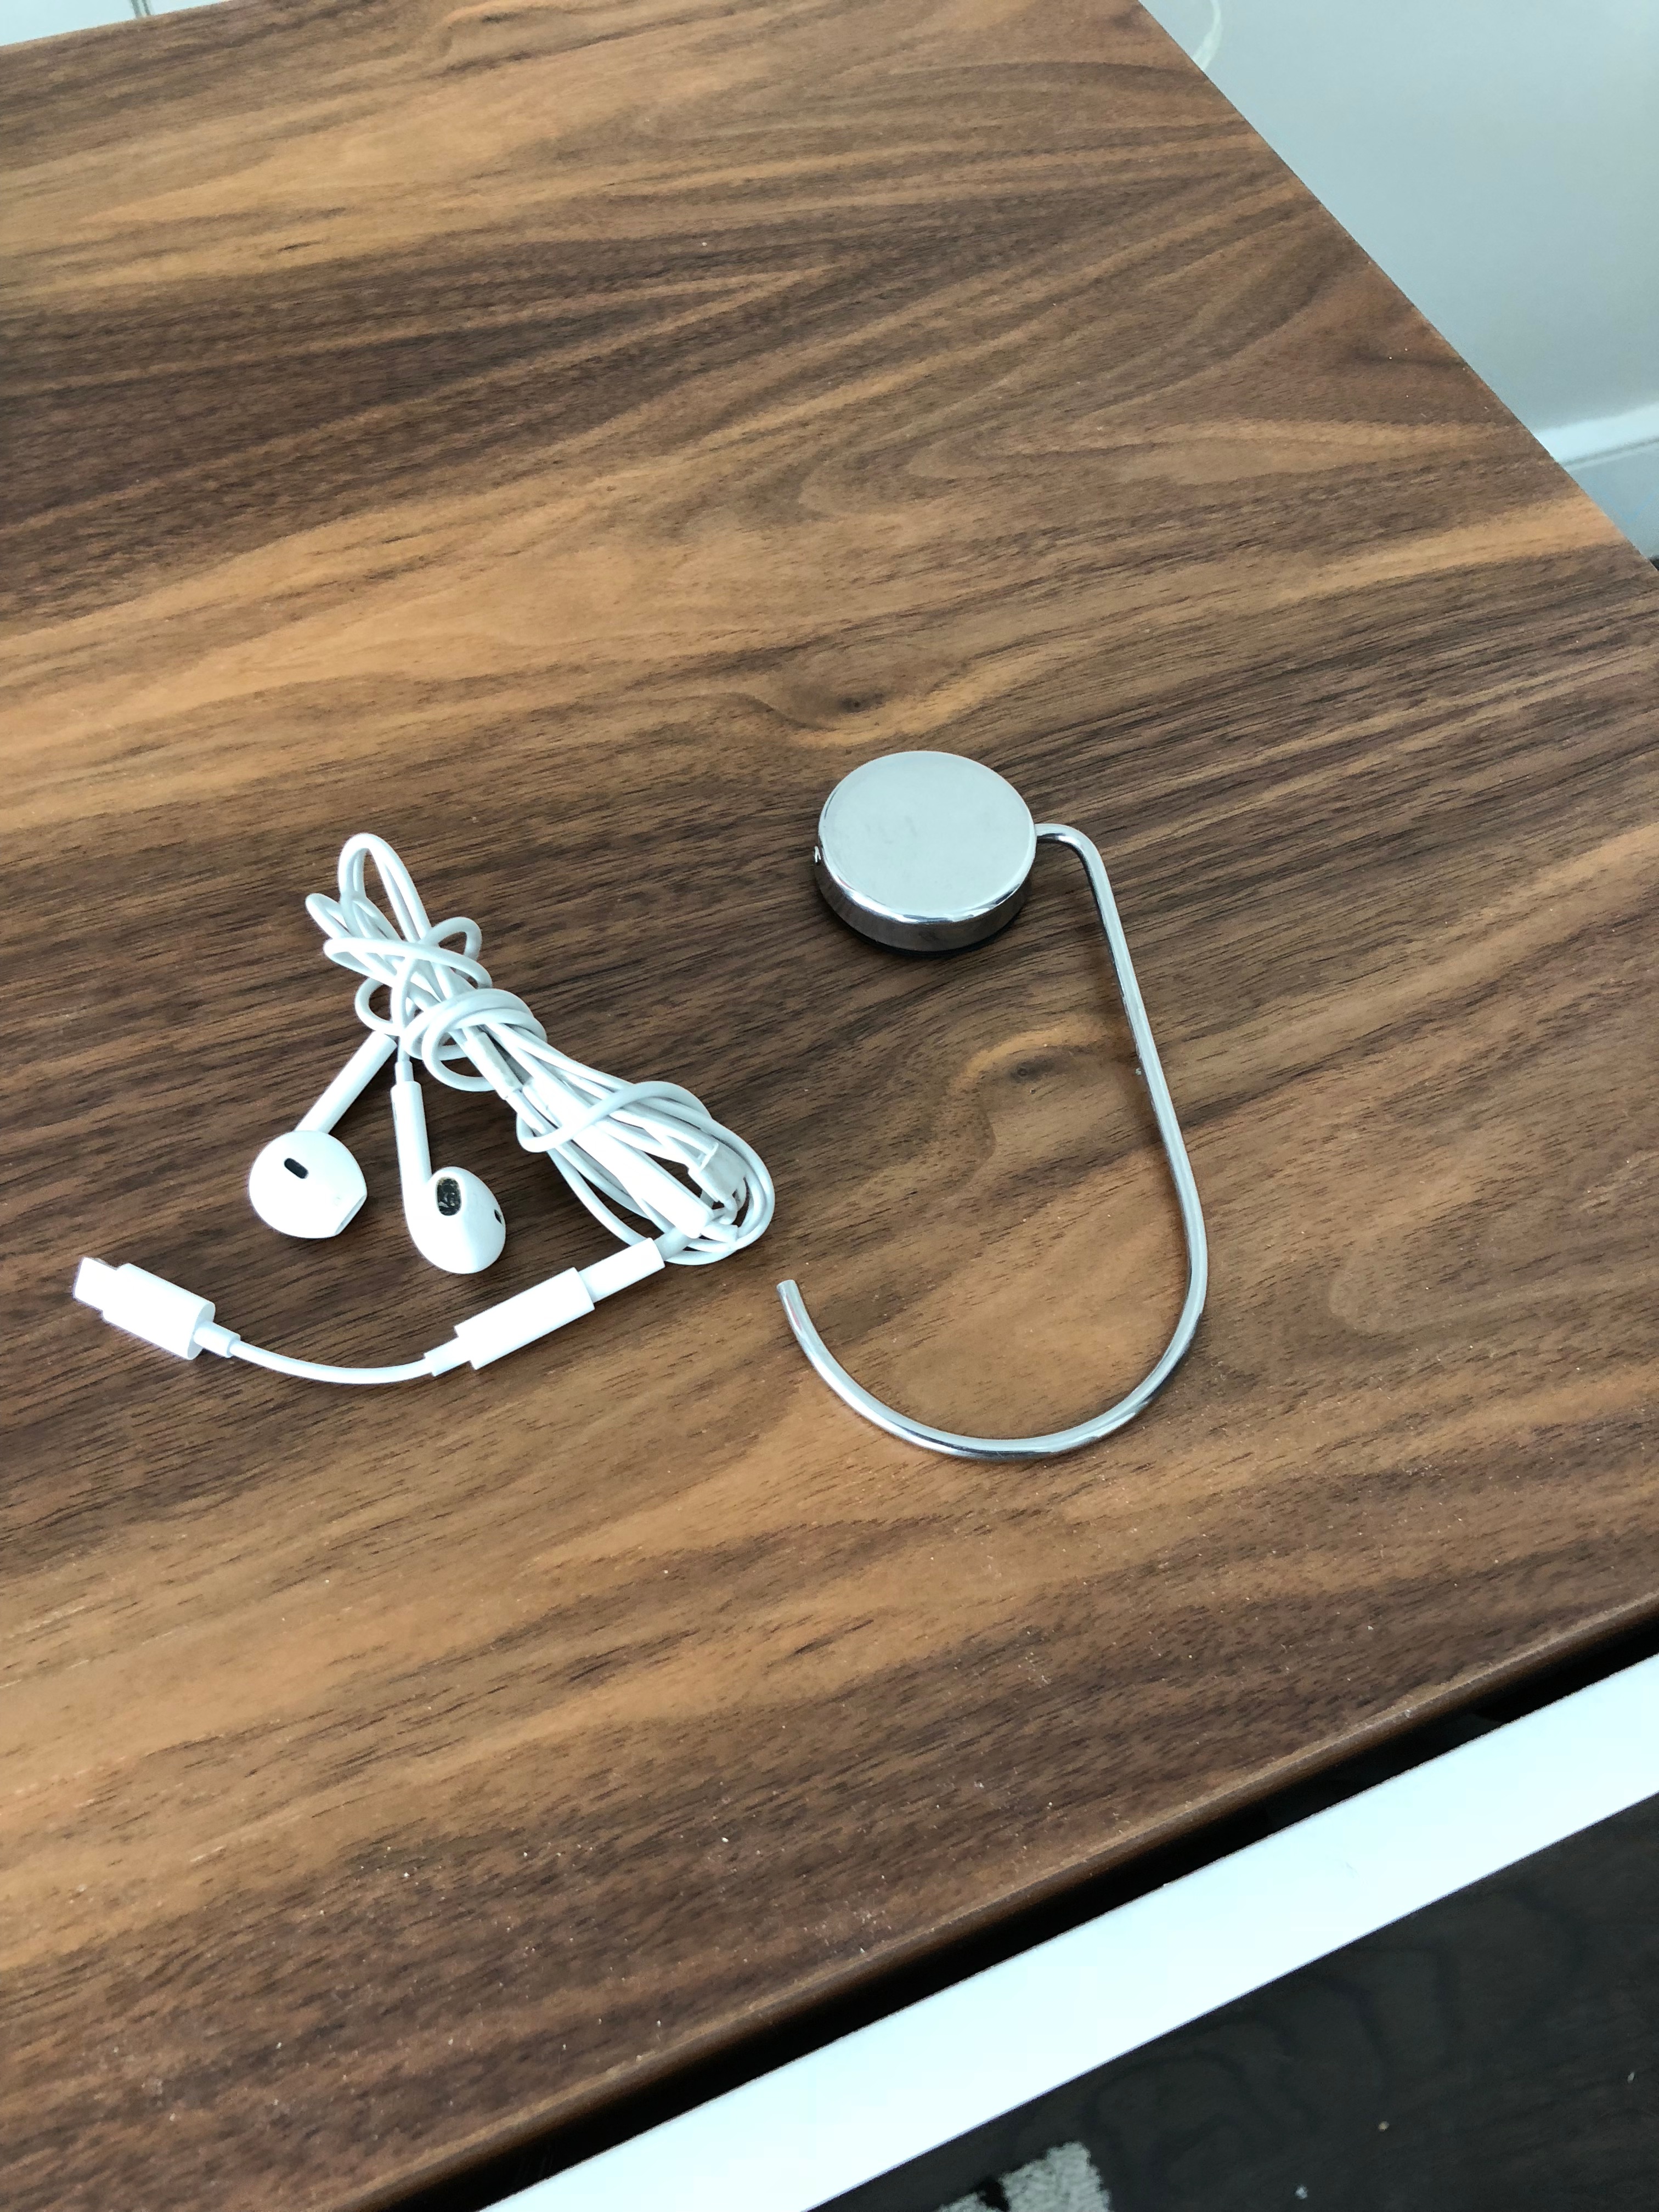 Purse Hook and Earbuds